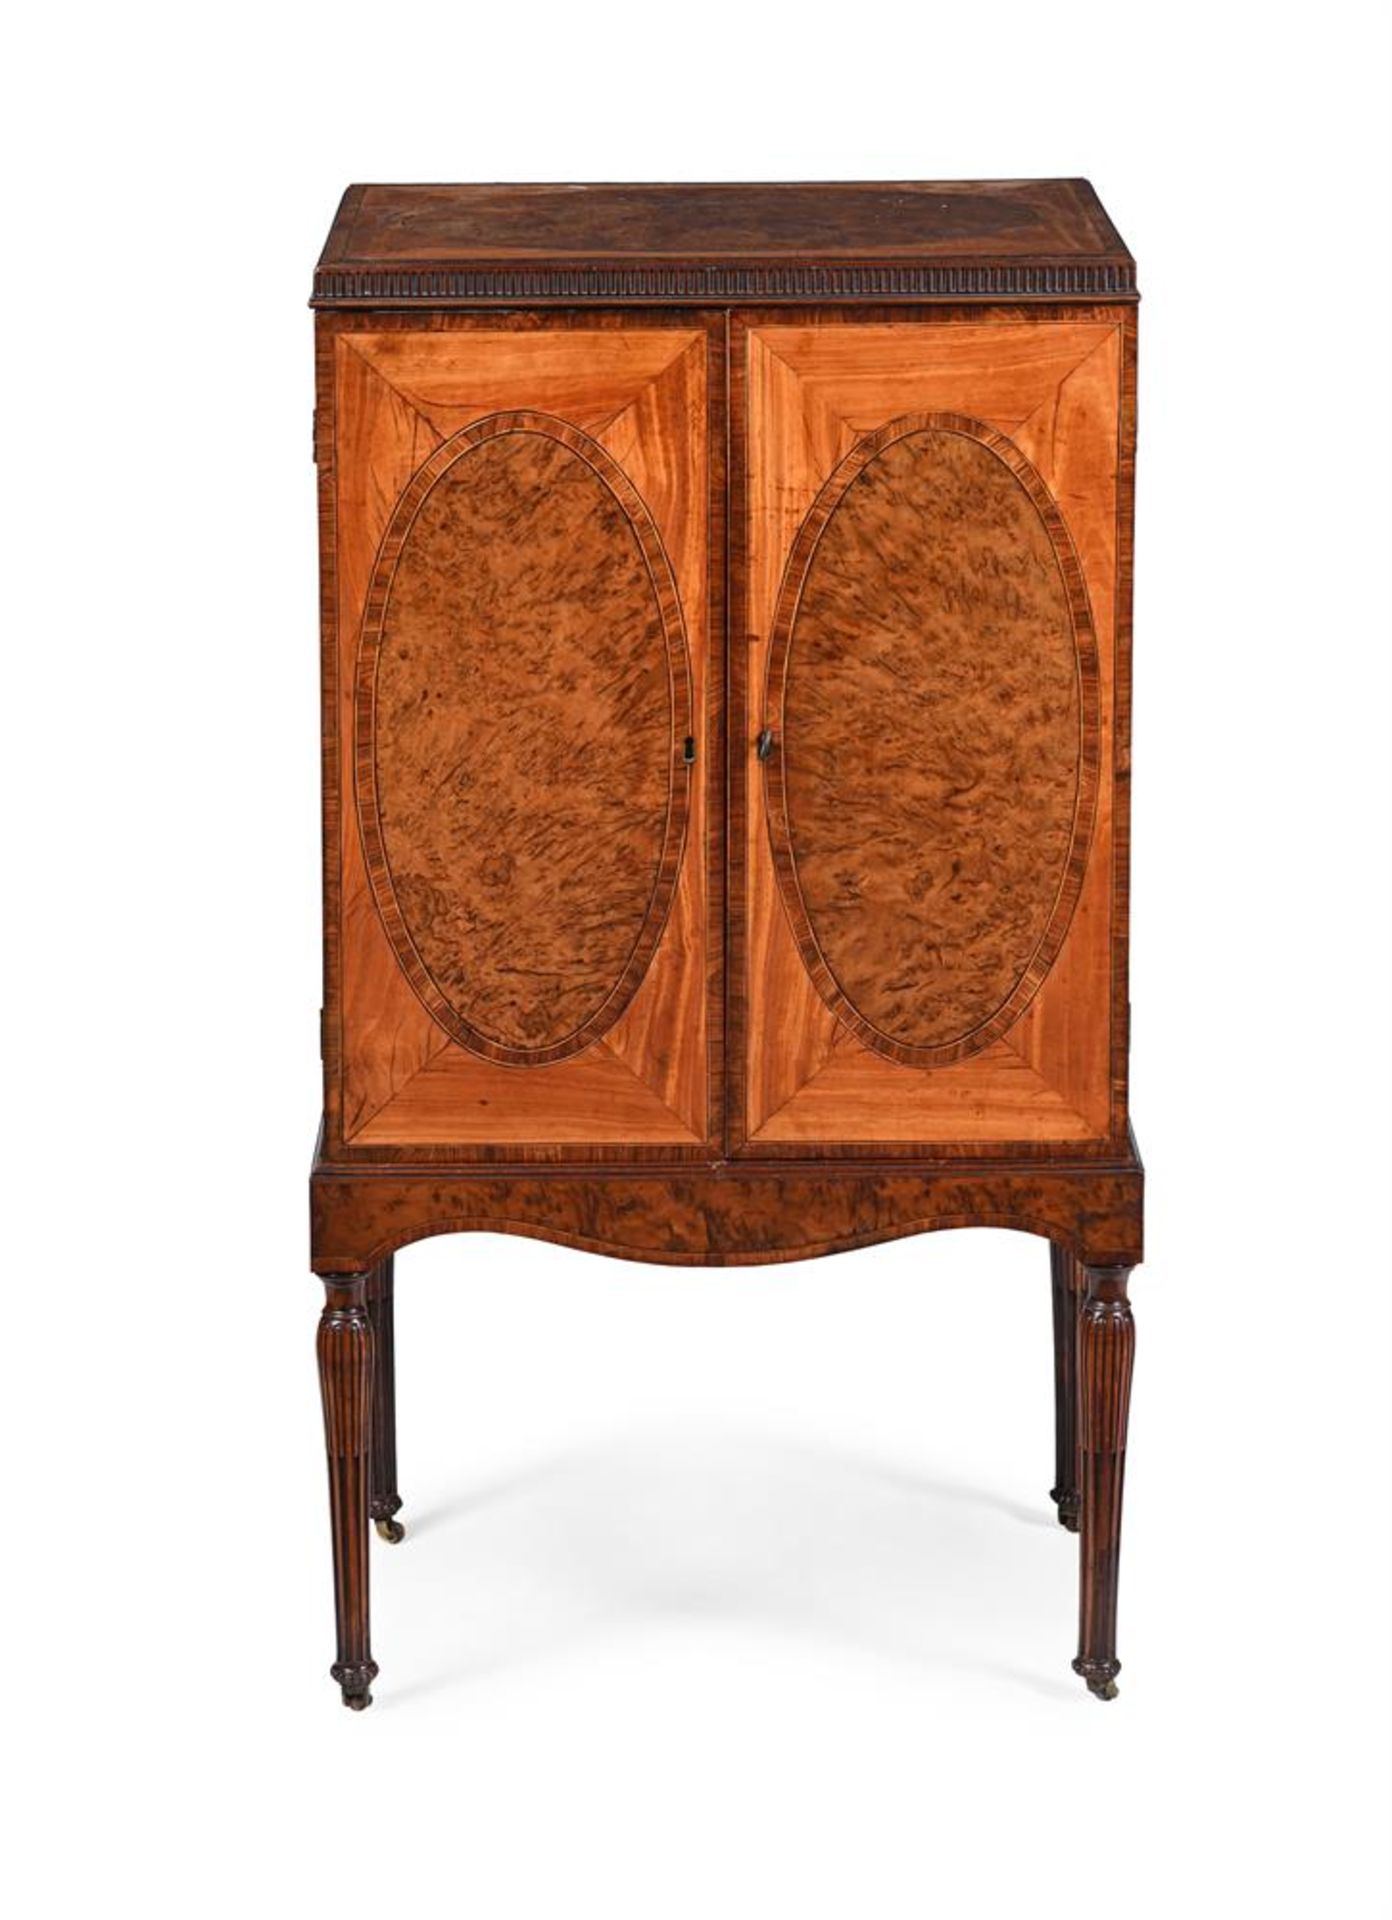 Y A GEORGE III SATINWOOD, BURR YEW AND TULIPWOOD CROSSBANDED COLLECTOR'S CABINET ON STAND, CIRCA 181 - Image 2 of 4